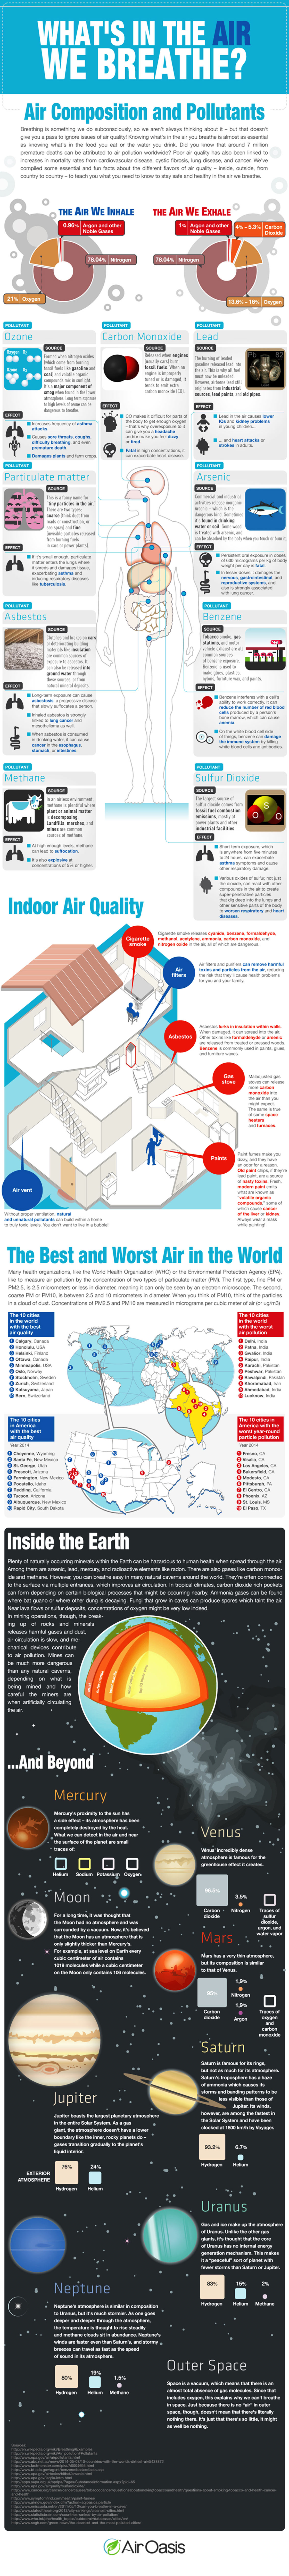 Composition of Air We Breathe Infographic